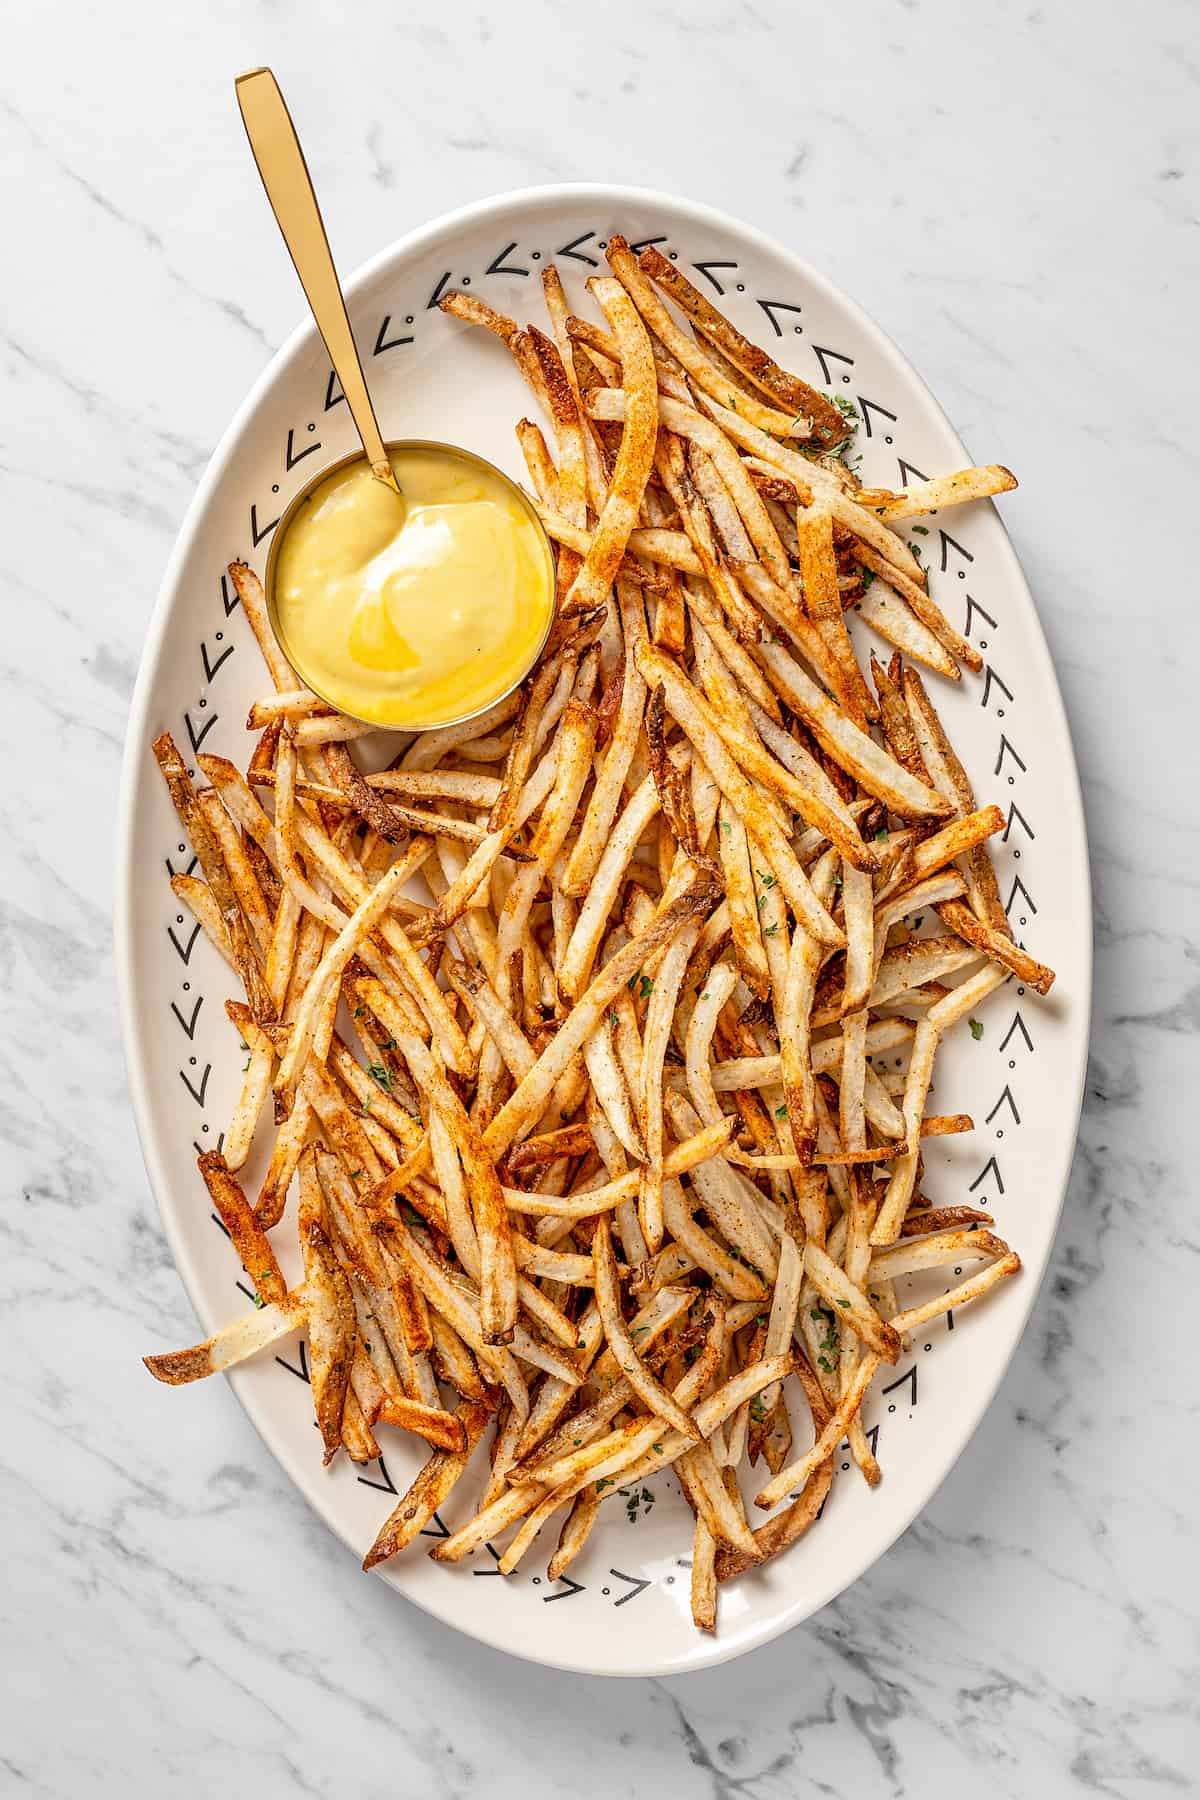 Overhead view of air fryer shoestring fries on platter with dipping sauce